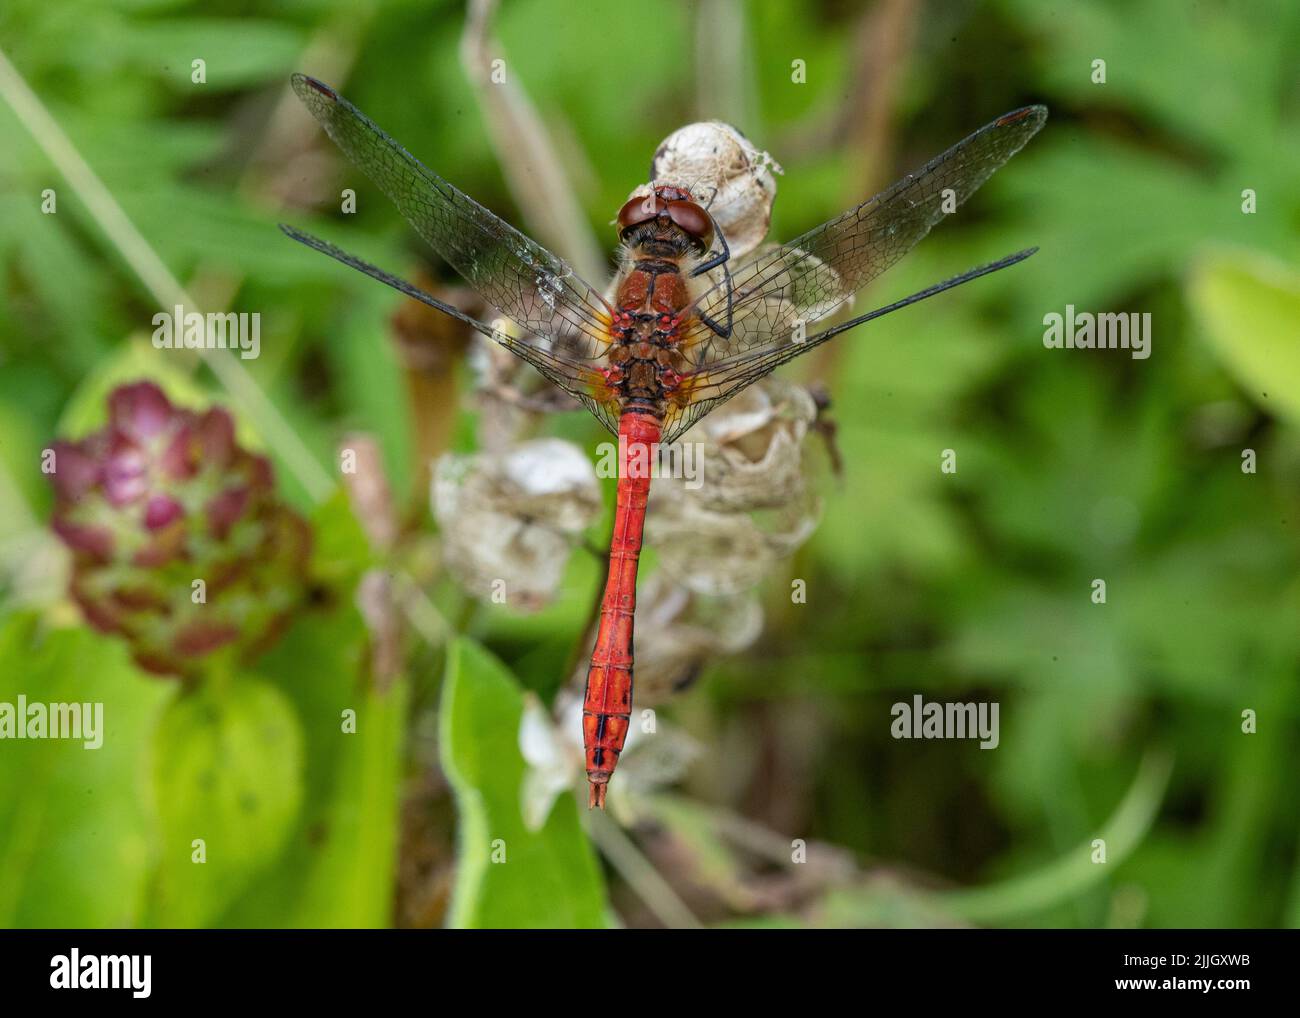 A close up shot of a Ruddy Darter Dragonfly (Sympetrum sanguineum) resting on a self heal flower . Suffolk, UK Stock Photo